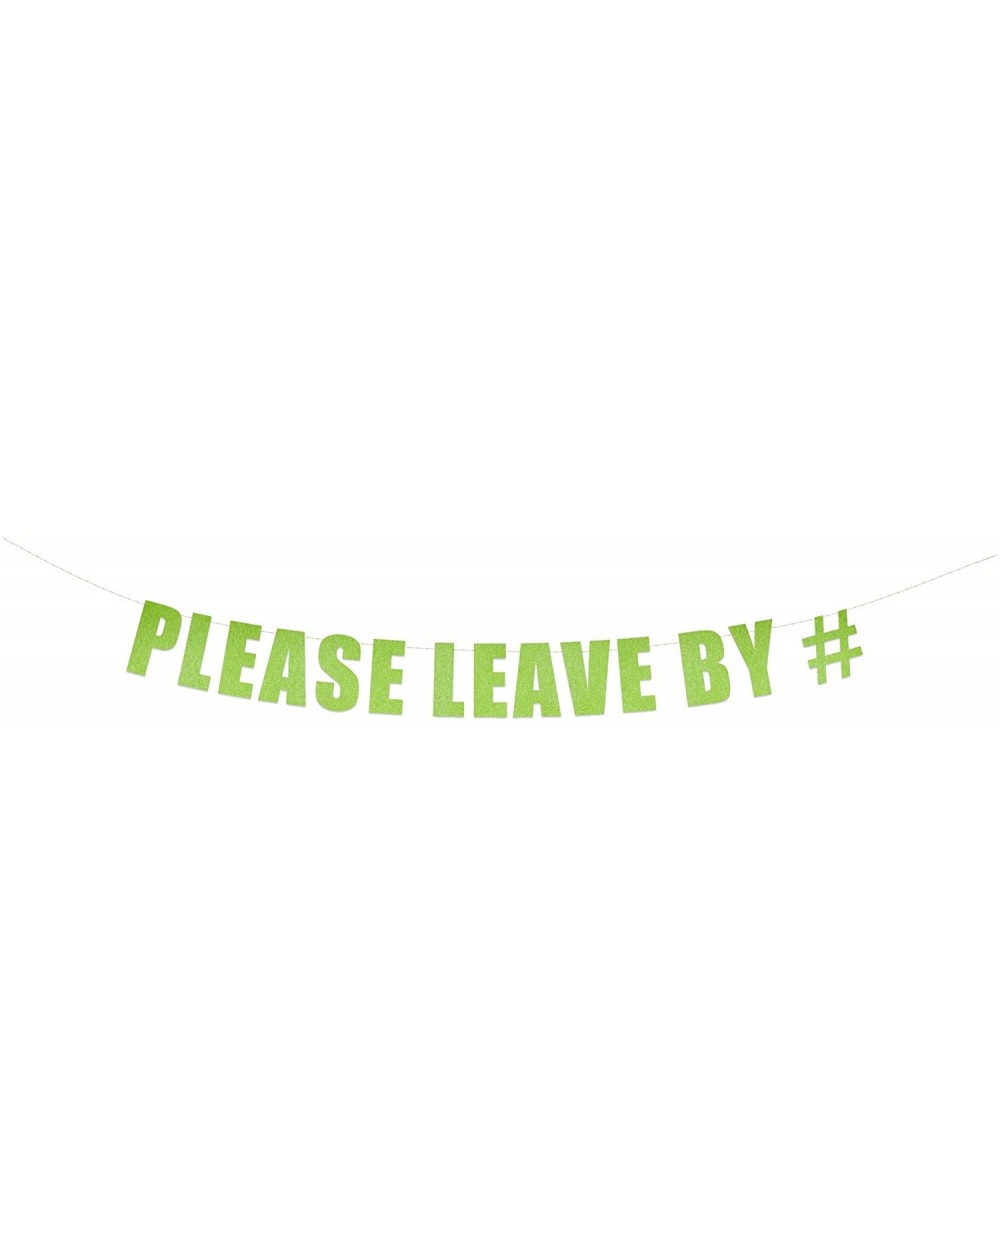 Banners & Garlands Please Leave by 9- or 1- 2- 3- 4- 5- 6- 7- 8- 10- 11- 12 Interchangeable Party Hanging Letter Banner Sign ...